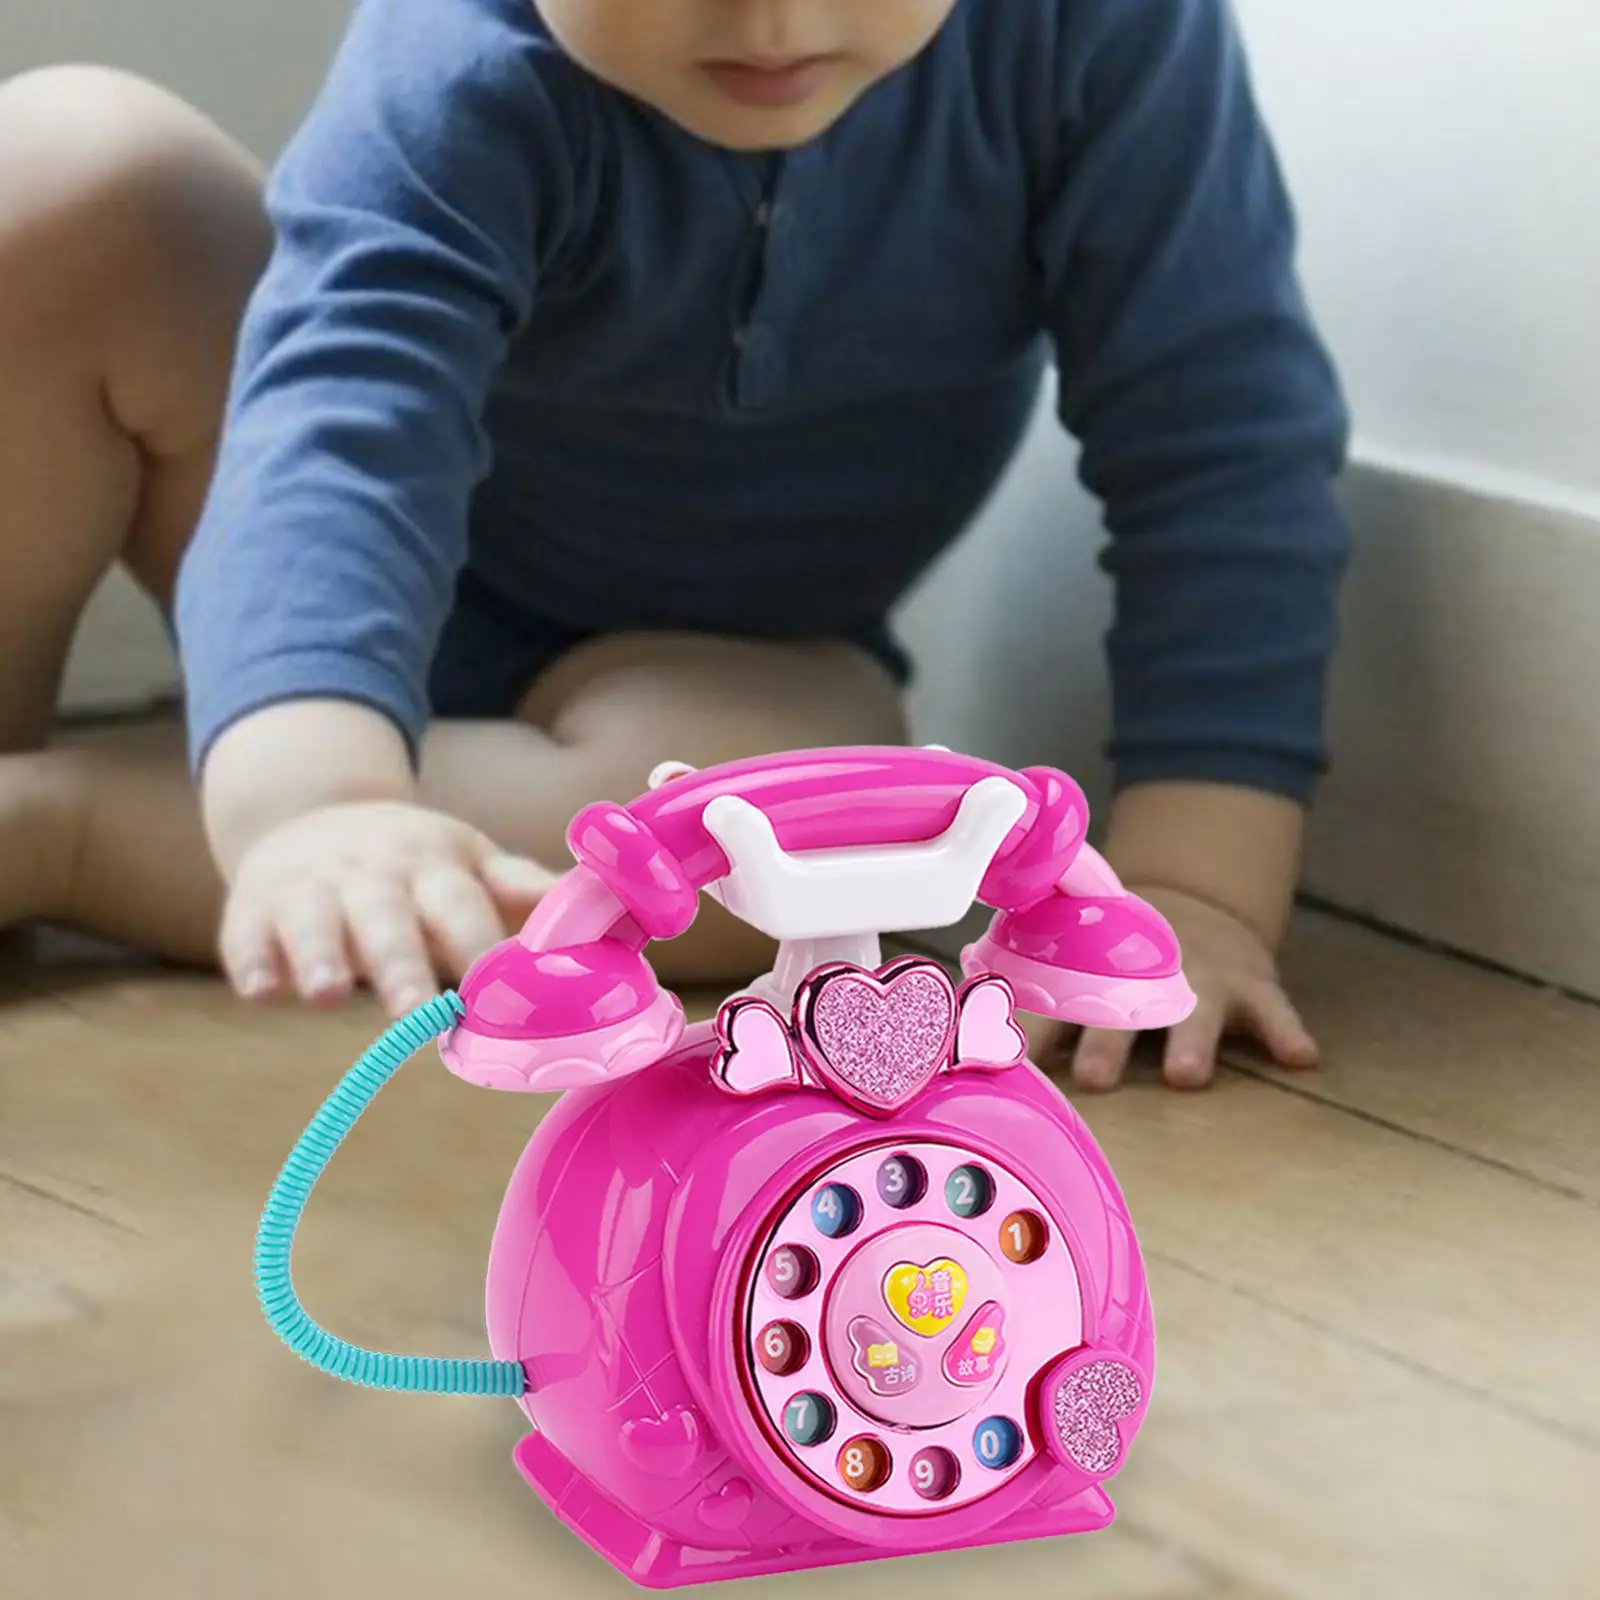 Telephone Toy Storytelling Machine Multifunction with Light for Pretend Play